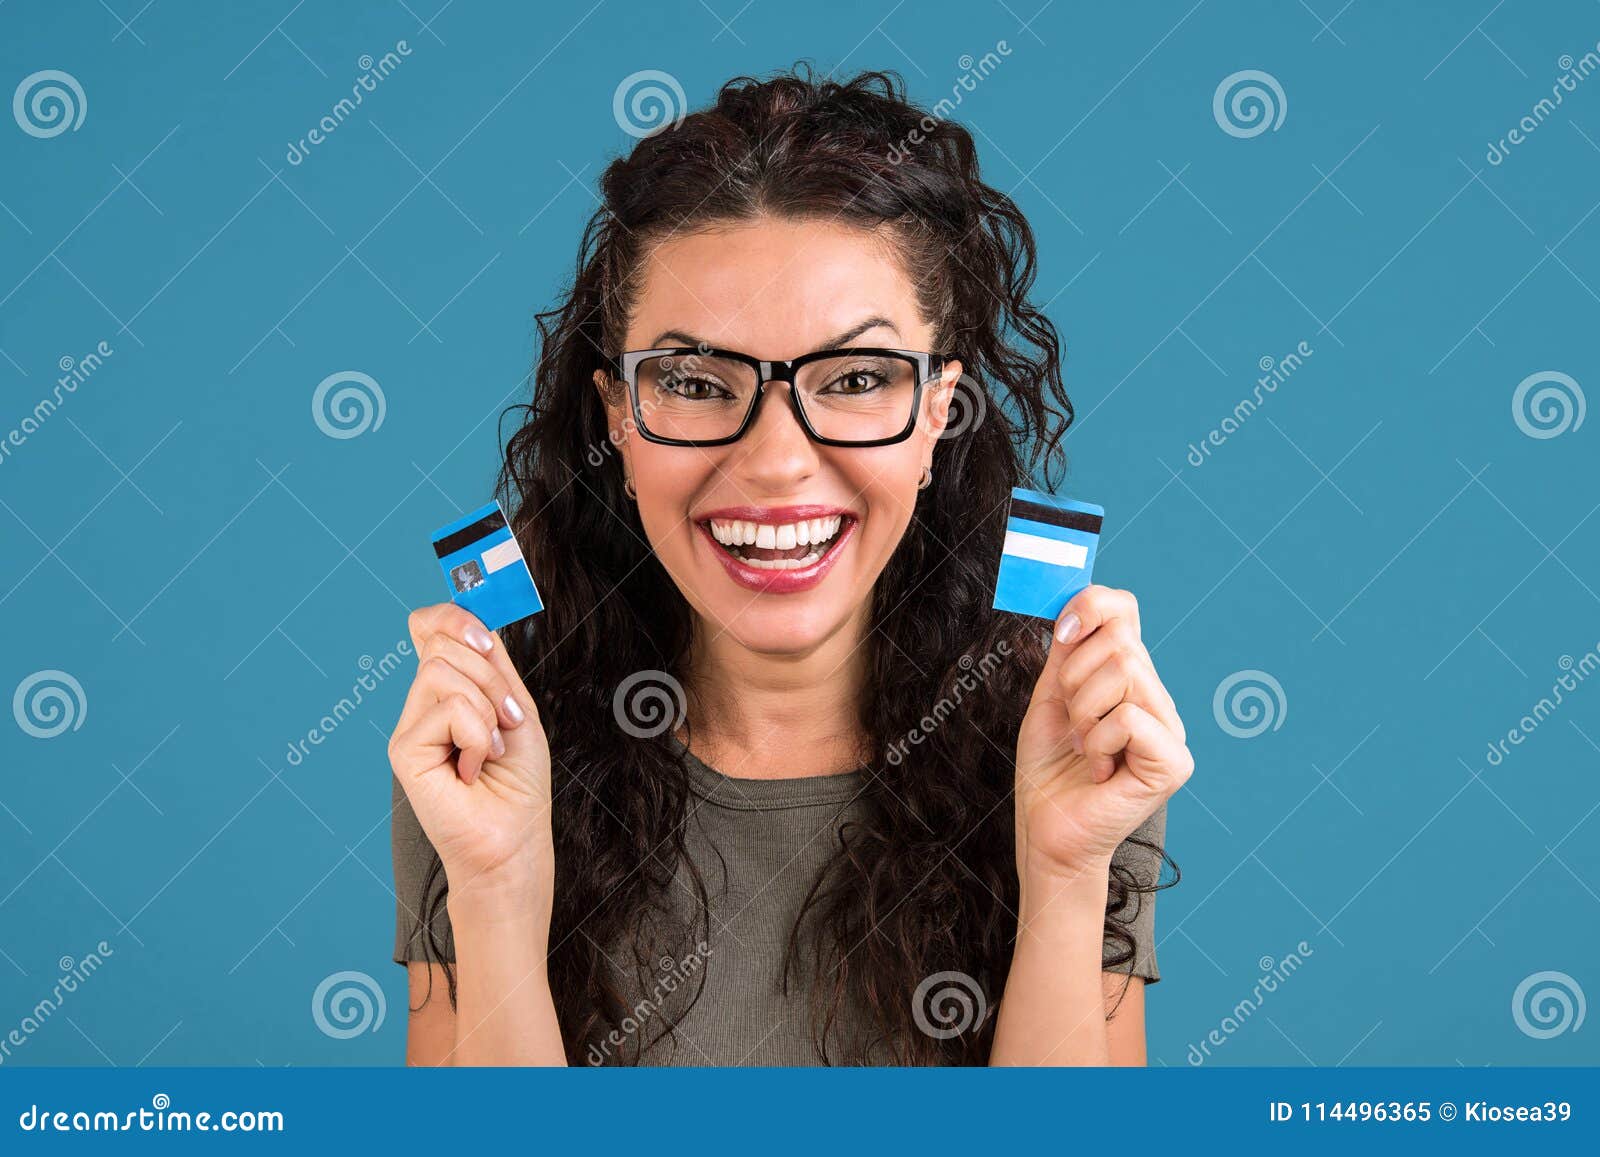 happy debt free woman holding a credit card cut in two pieces